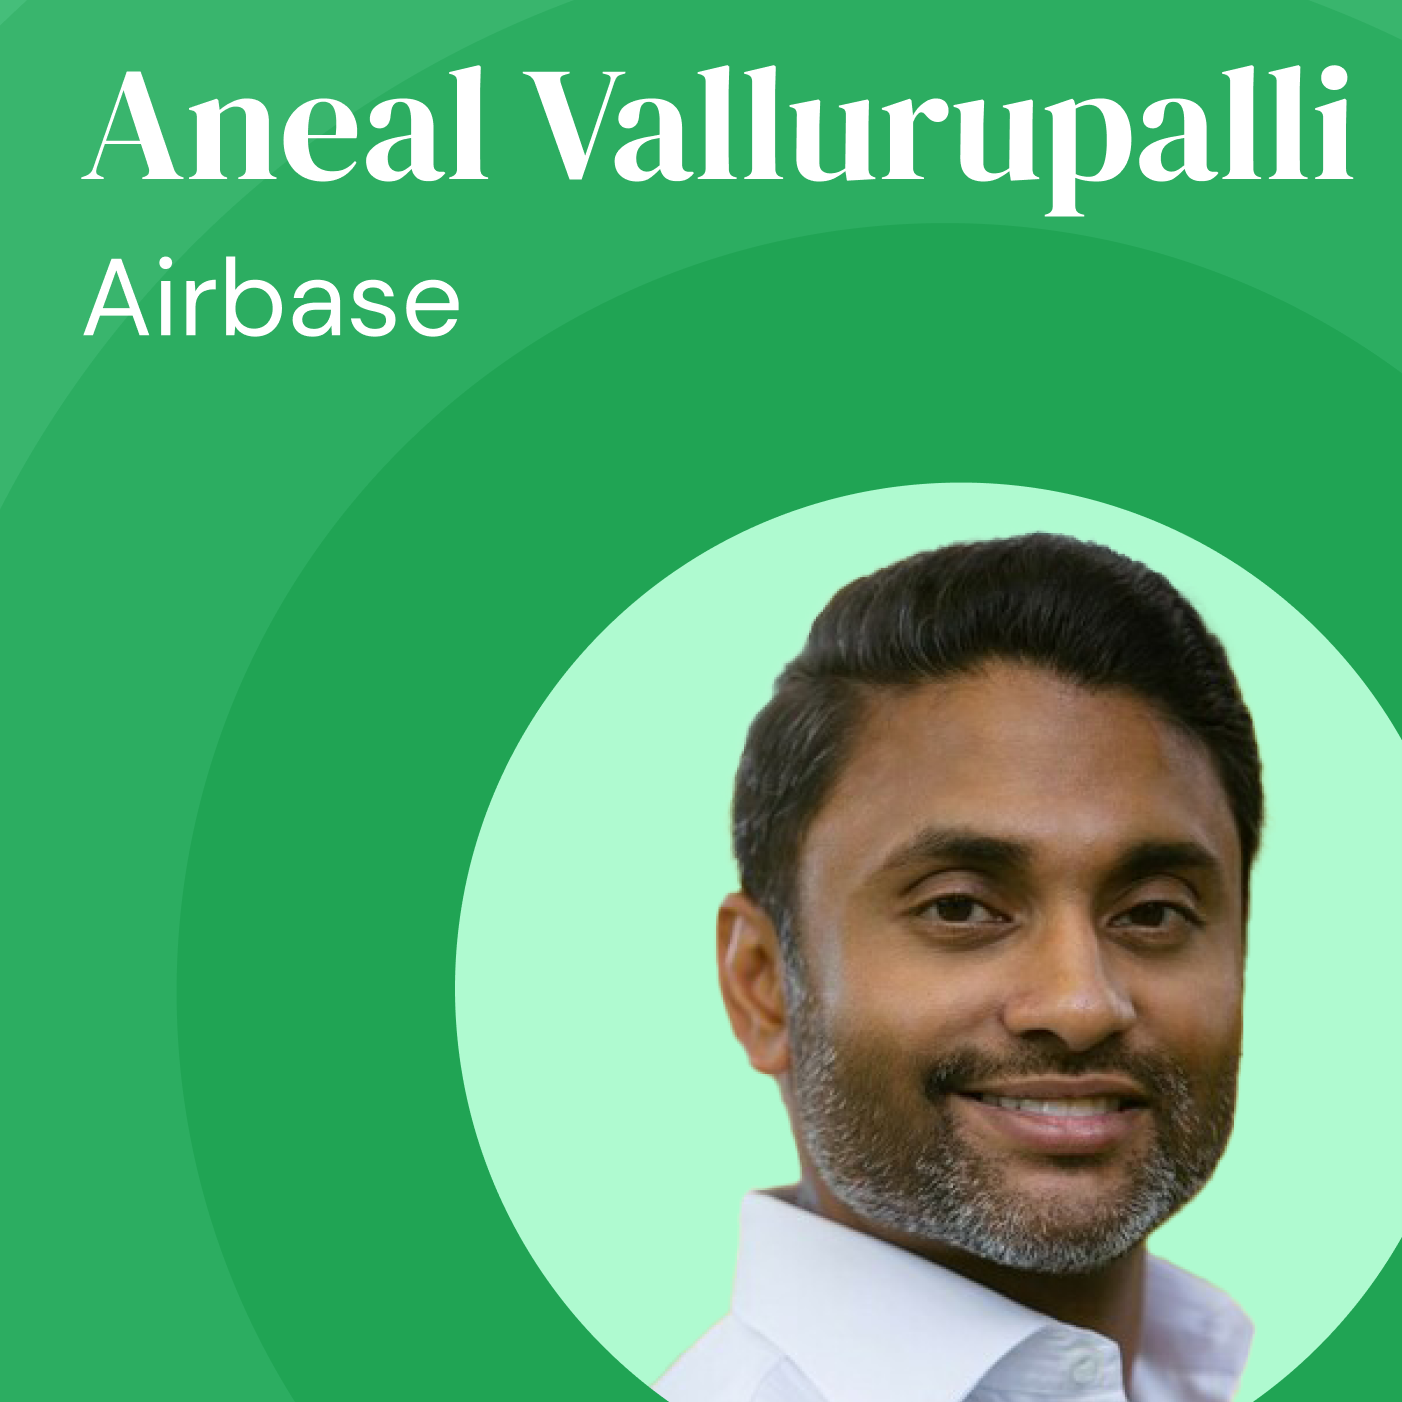 From Investment Banking to Operations: A CFO's Journey | Aneal Vallurupalli